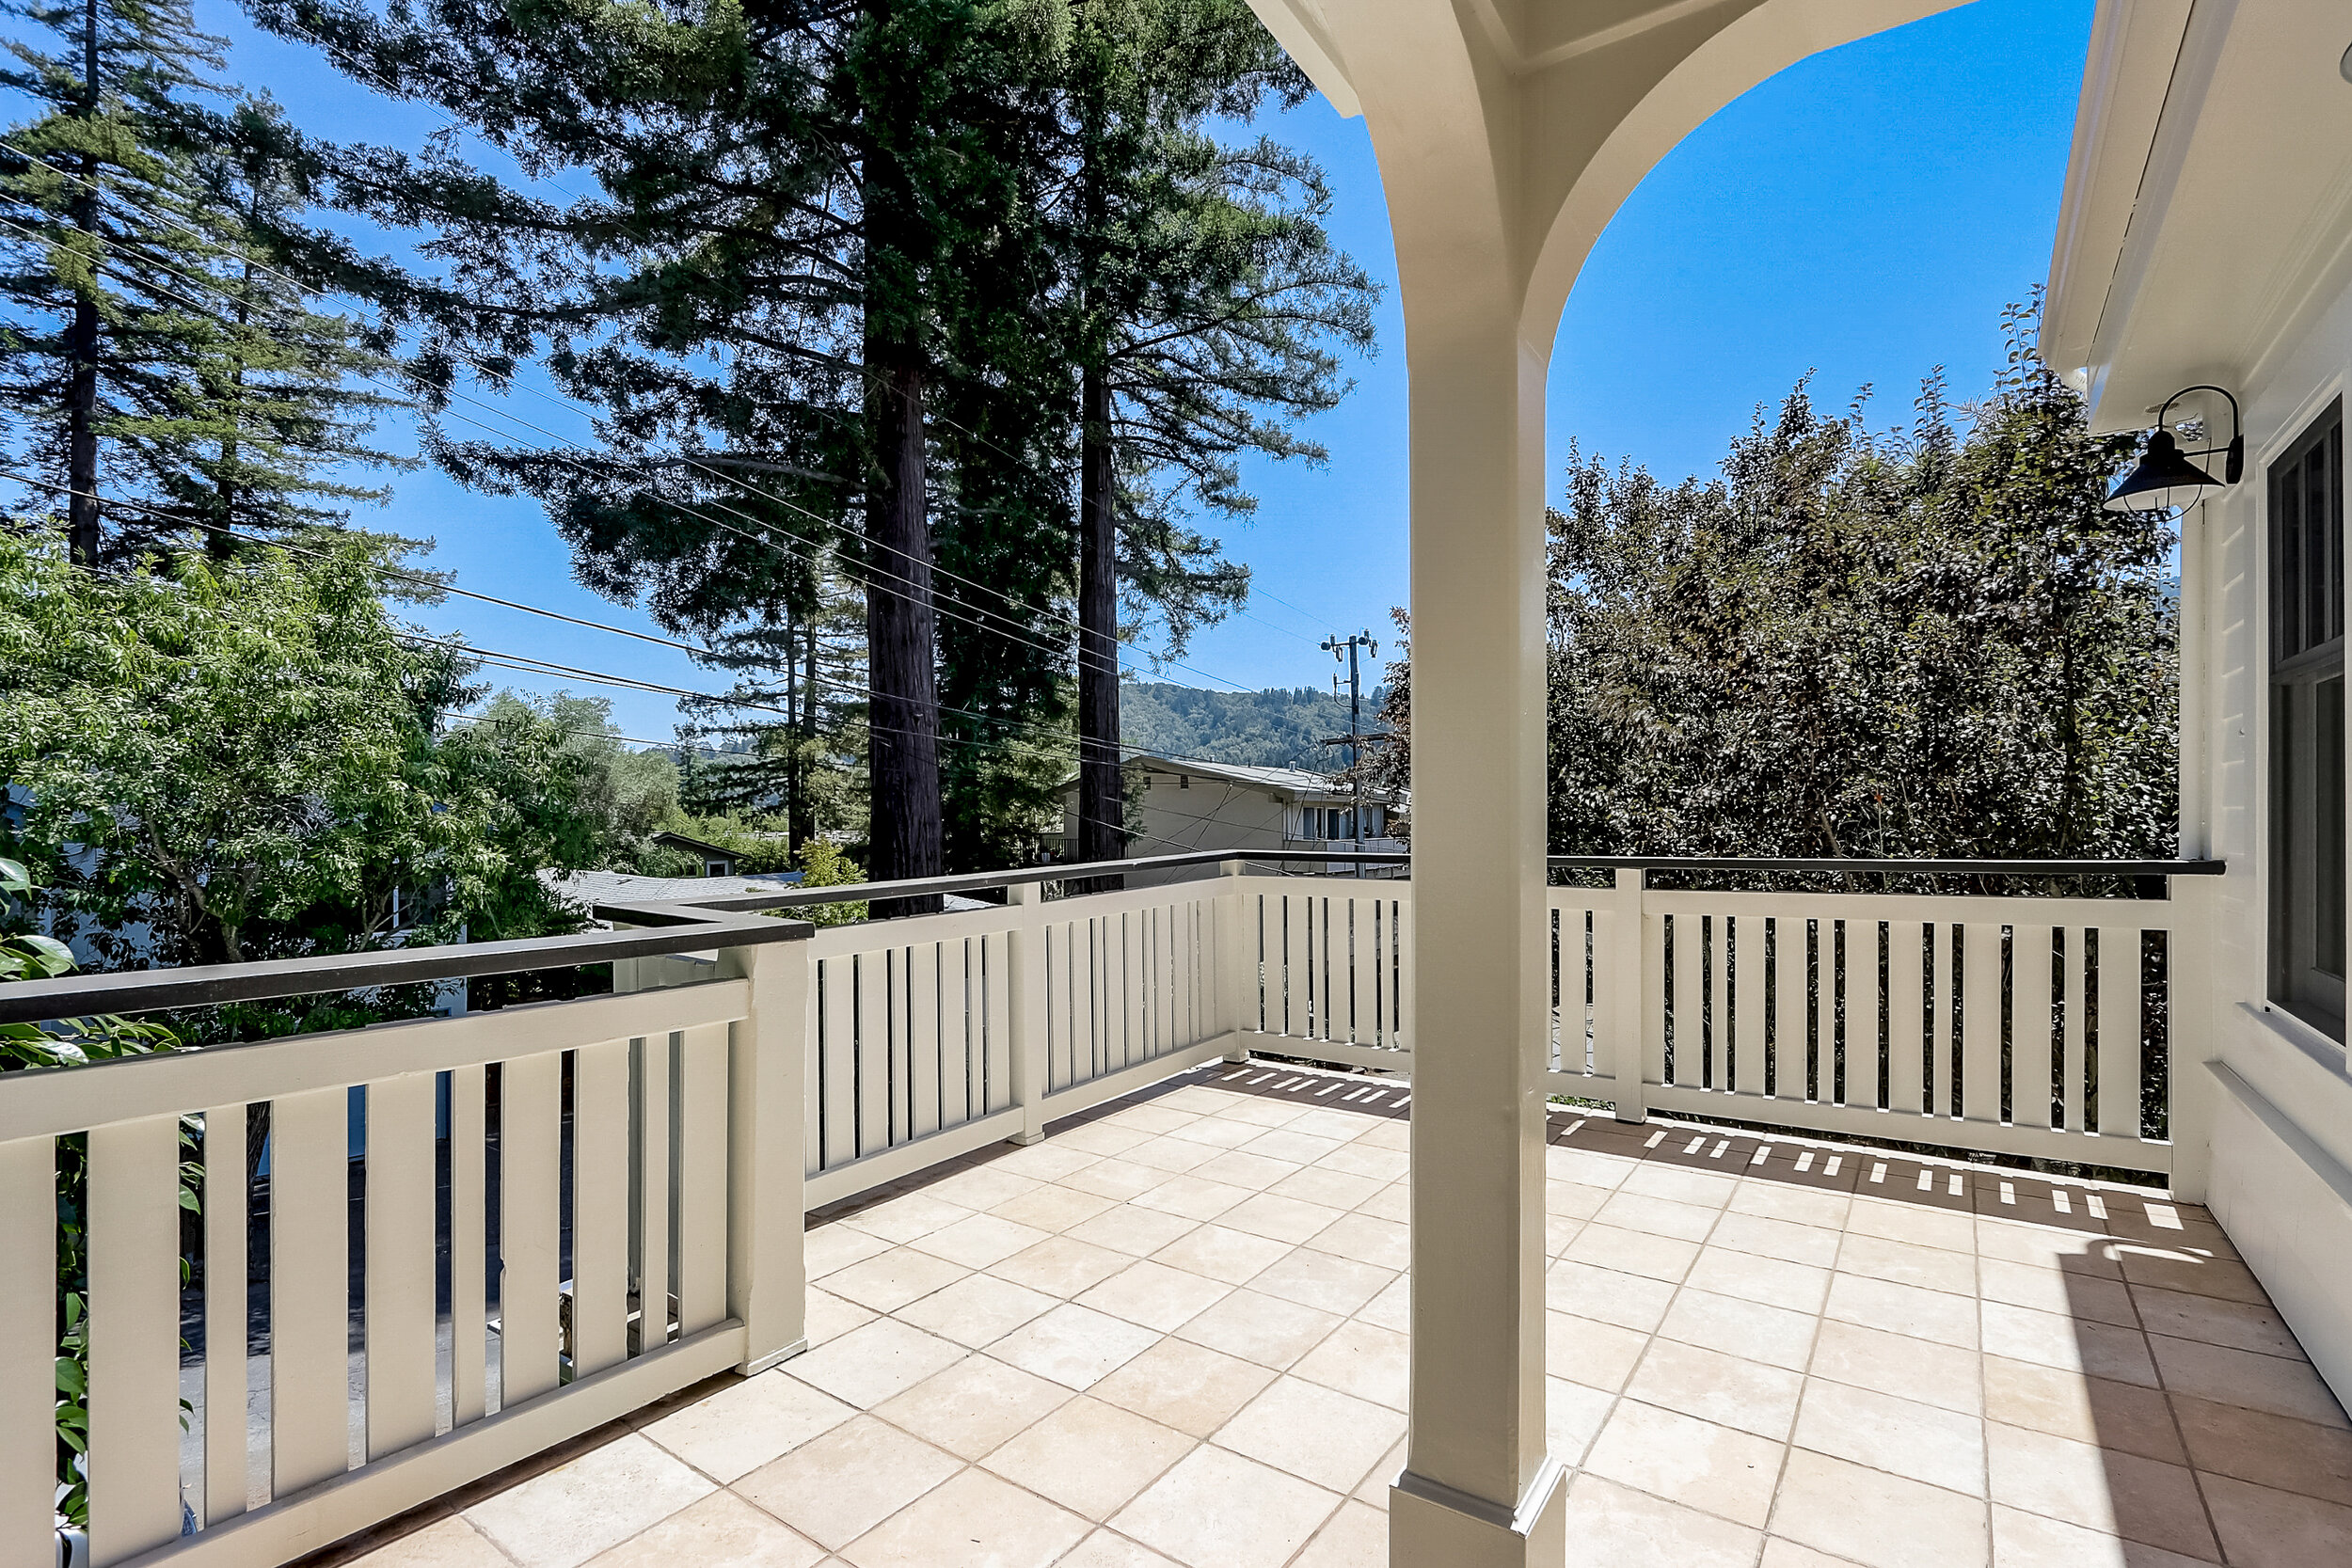 Own Marin Barr Haney Whitney Potter For Sale 9 Terrace Avenue, Kentfield California Marin County #1 Real Esate Agents-39.jpg